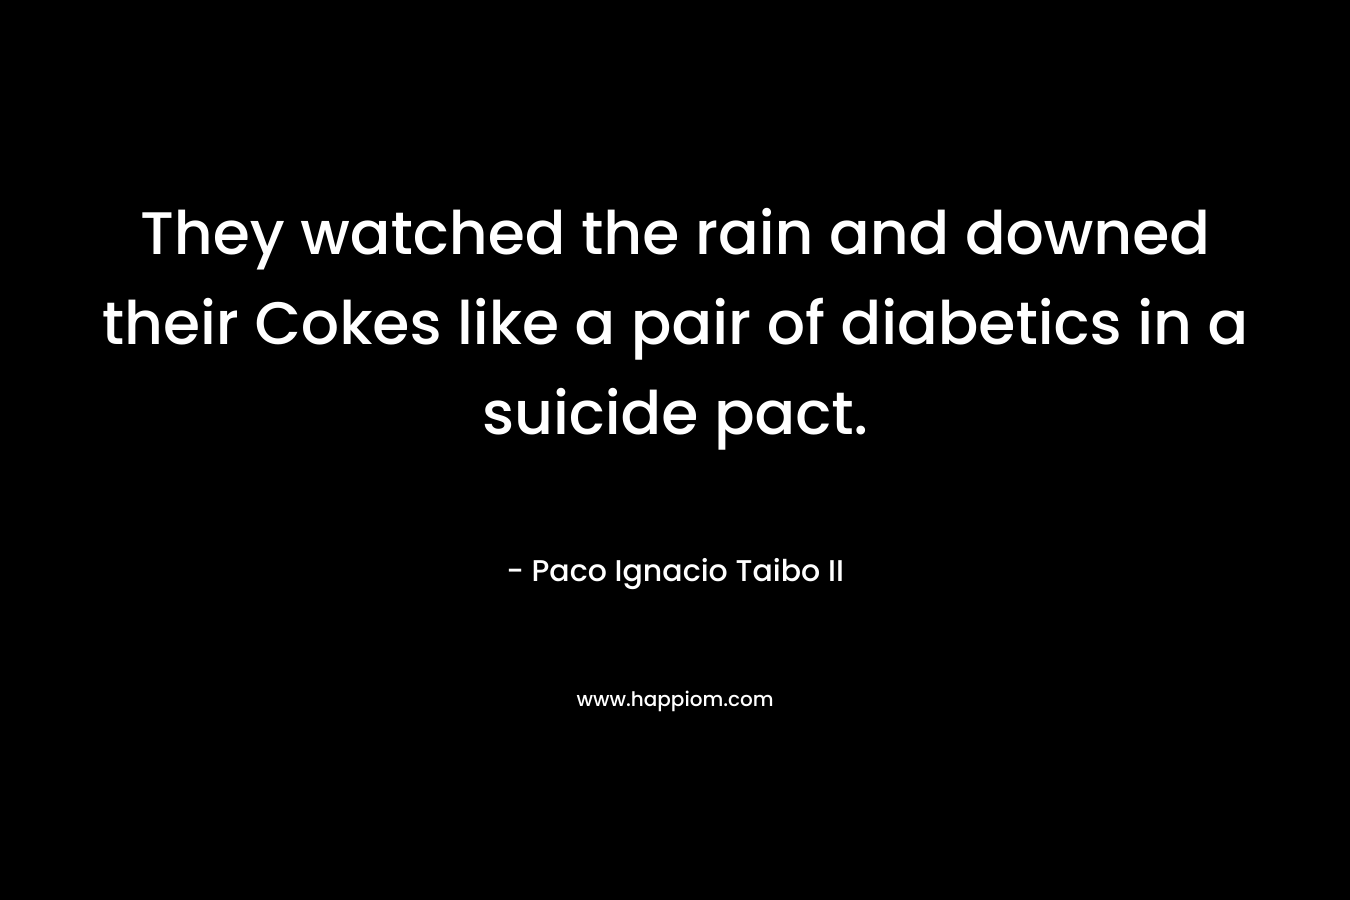 They watched the rain and downed their Cokes like a pair of diabetics in a suicide pact.